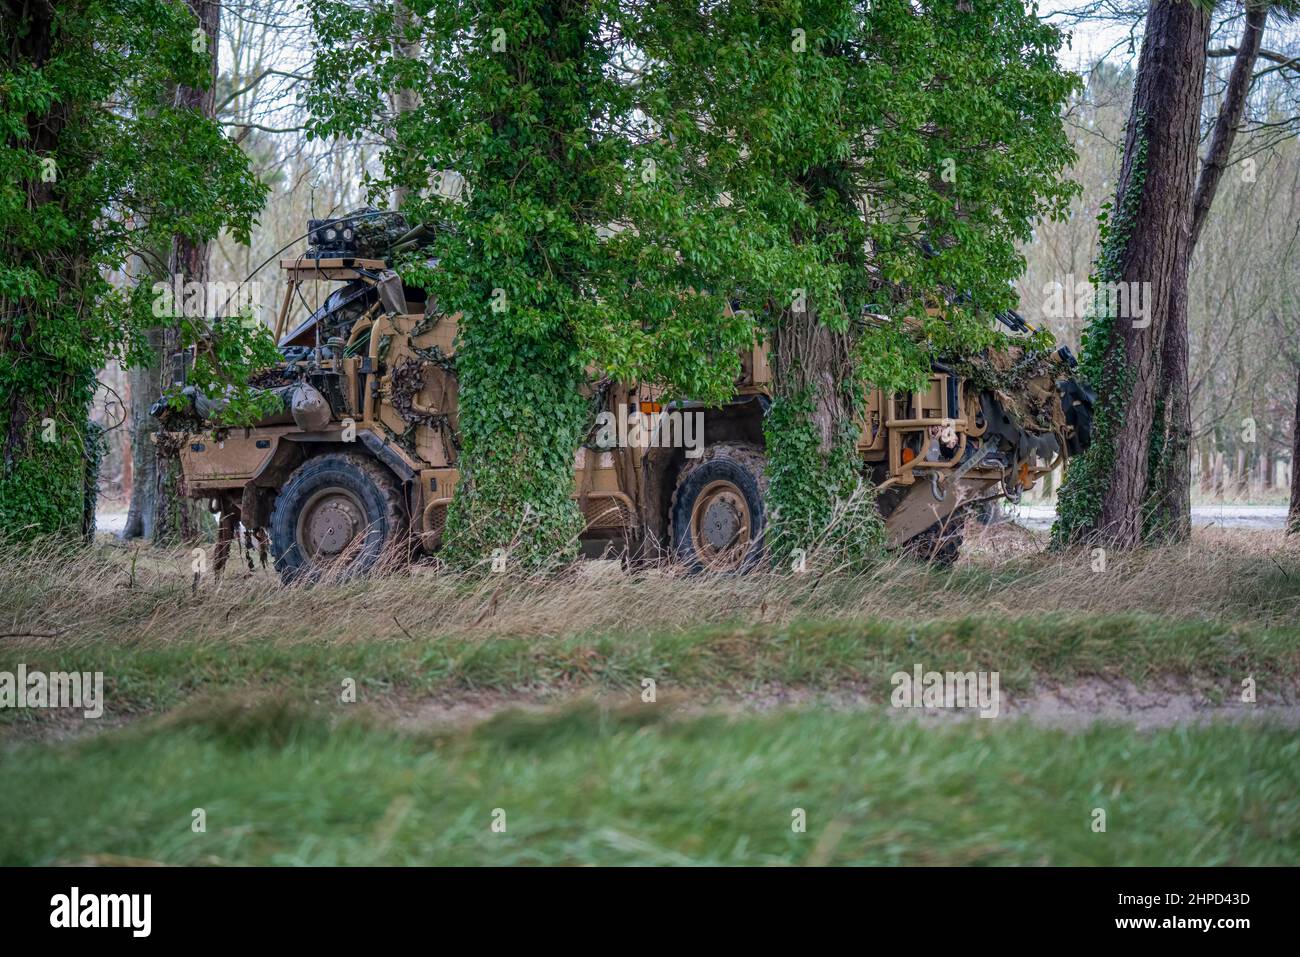 British army Supacat Jackal 4x4 rapid assault, fire support and reconnaissance vehicles on a military battle training exercise, Wiltshire UK Stock Photo